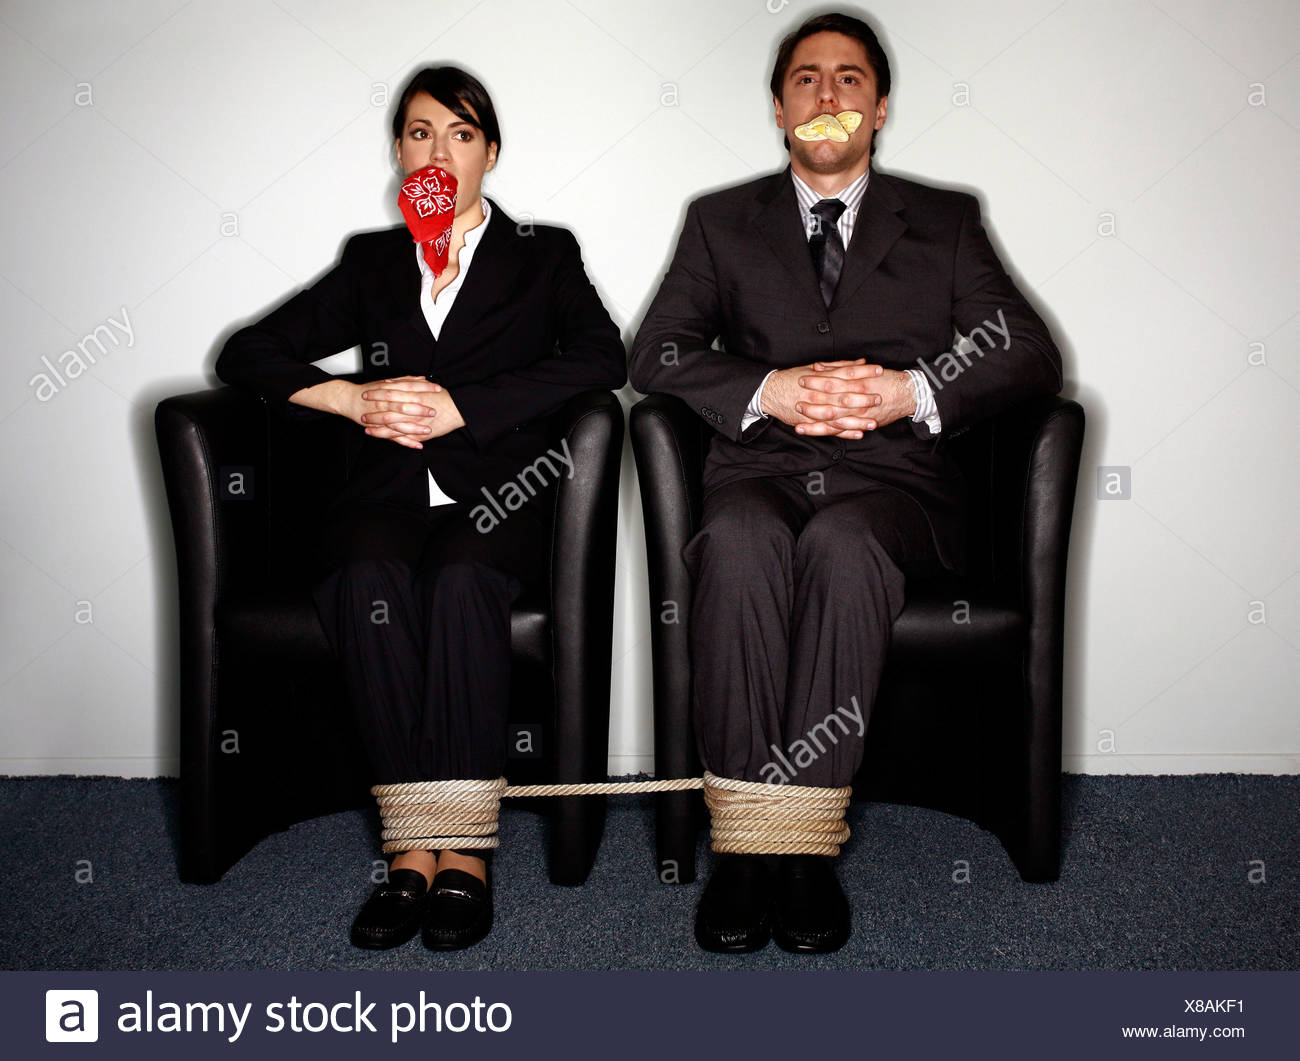 Male and female business people gagged and tied - Stock Image.